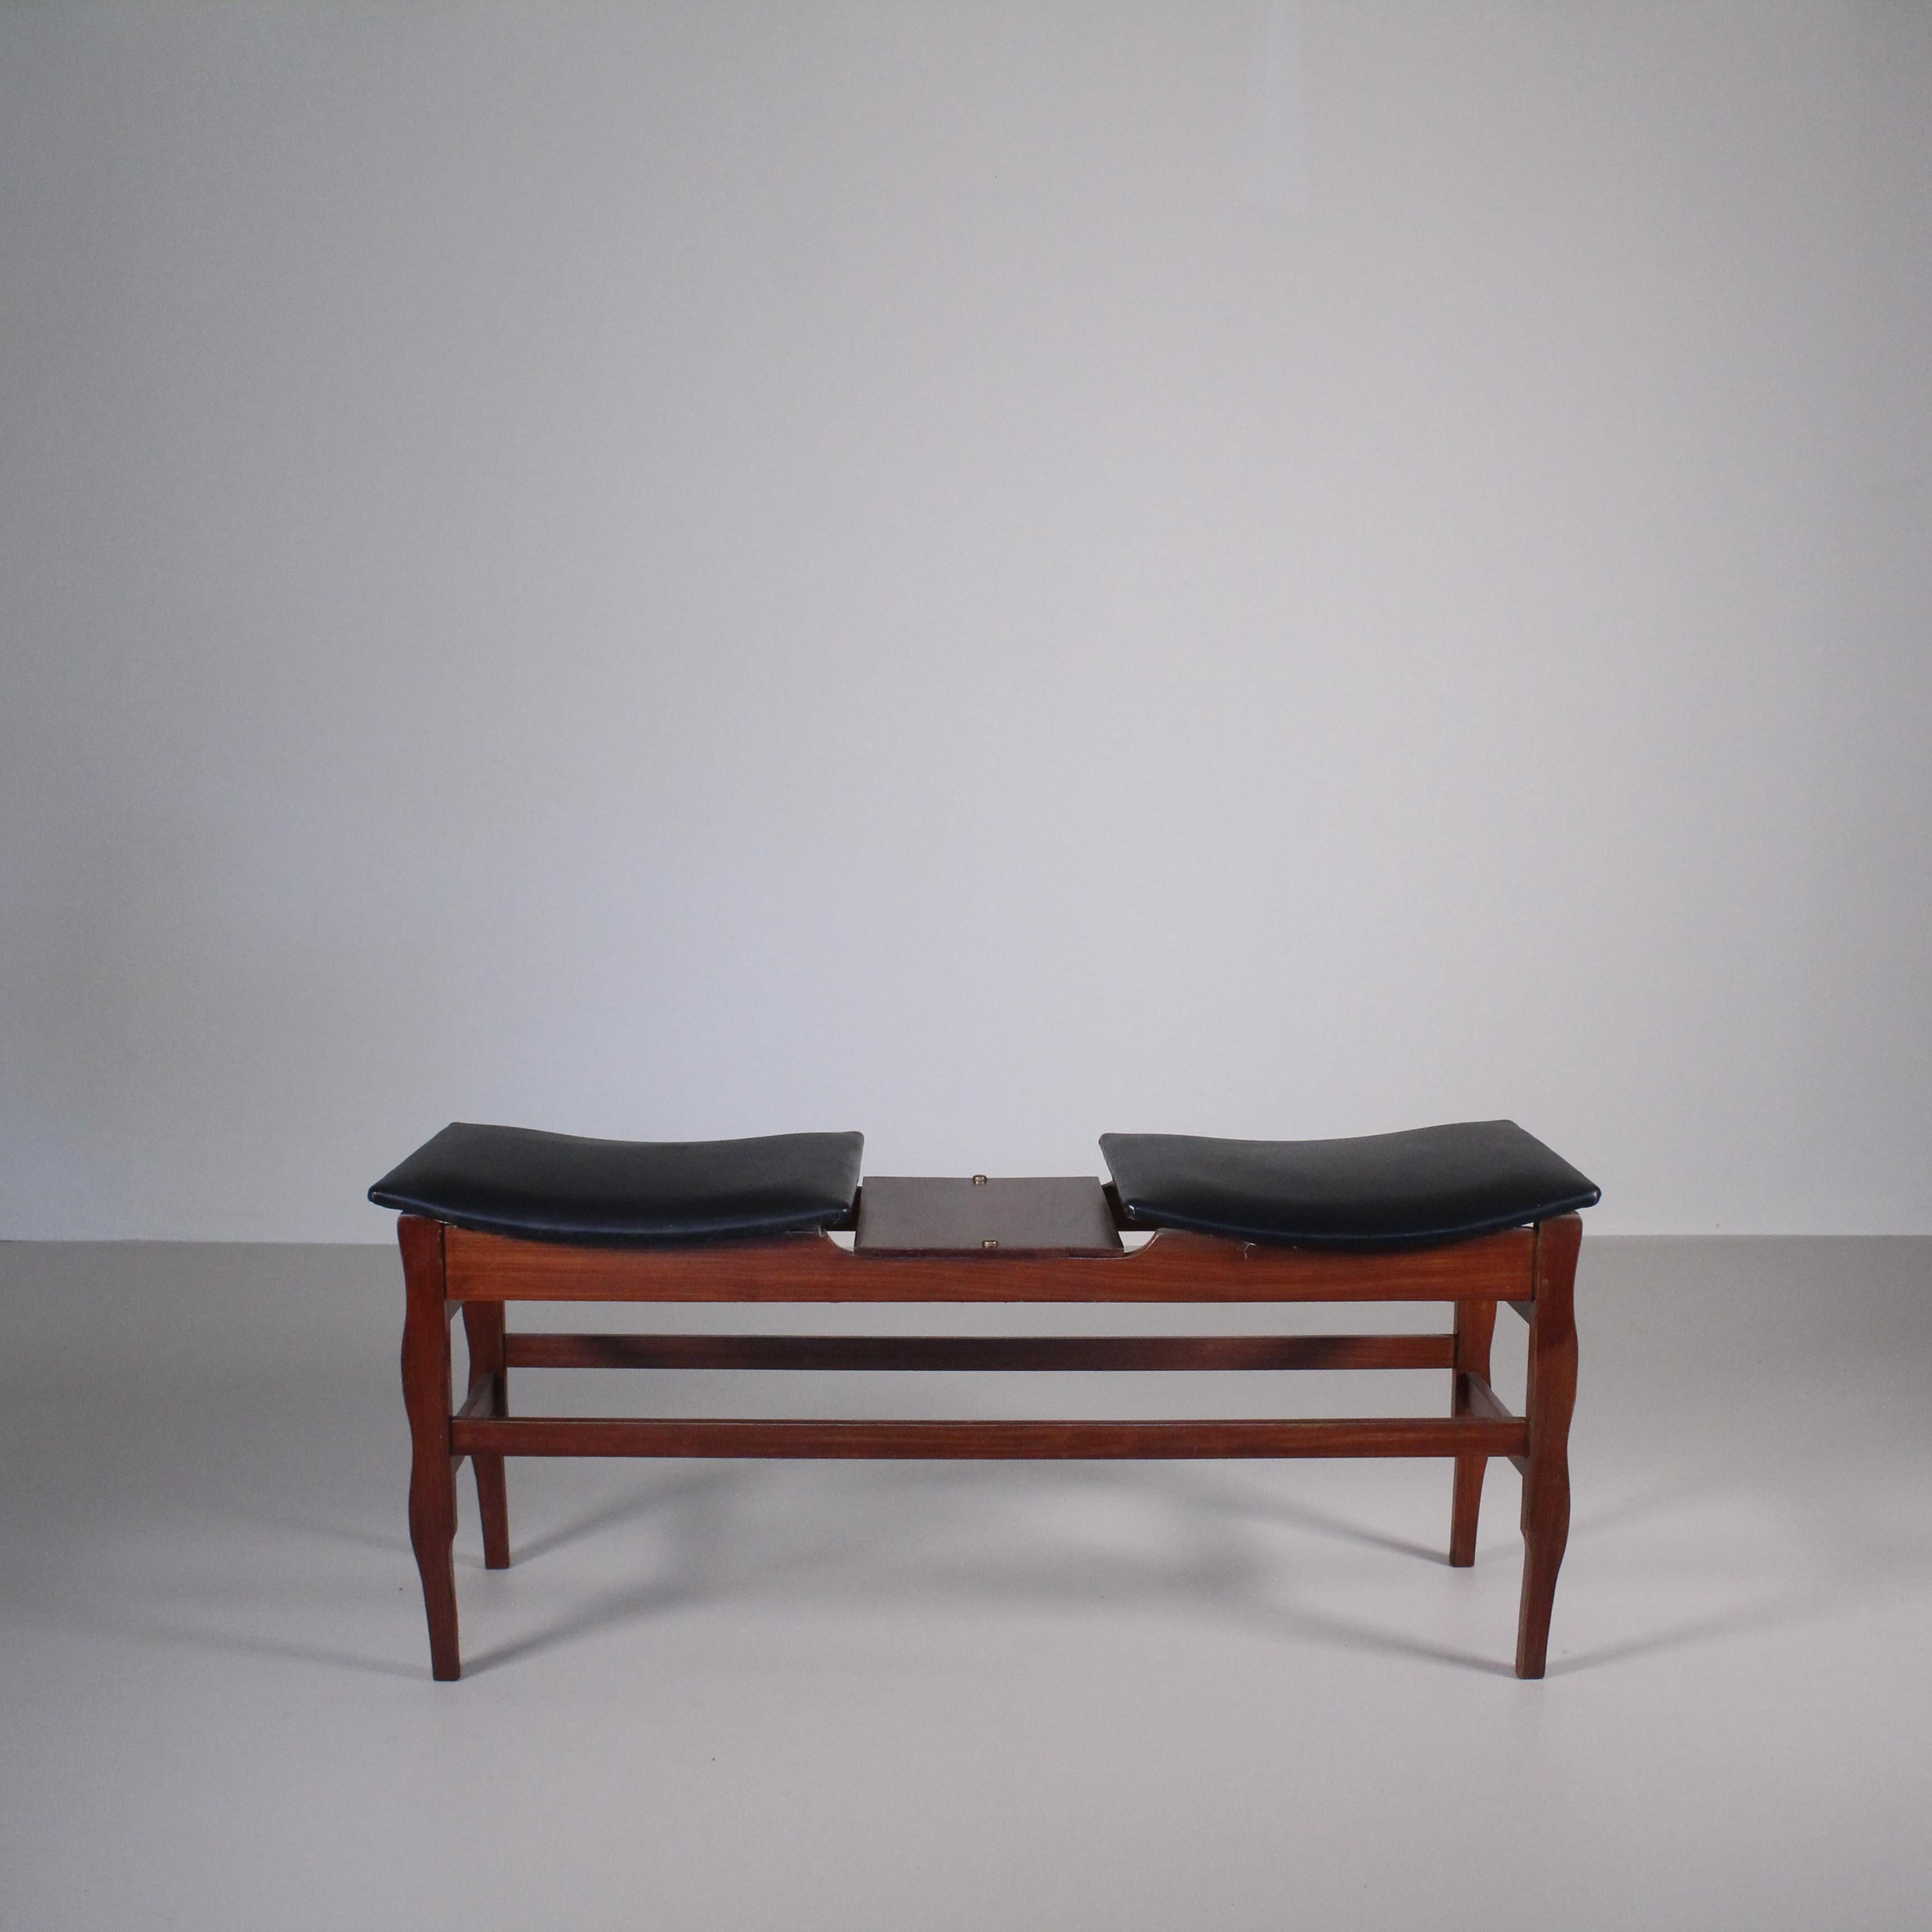 Bench in Wood E Black Leather Seats 11